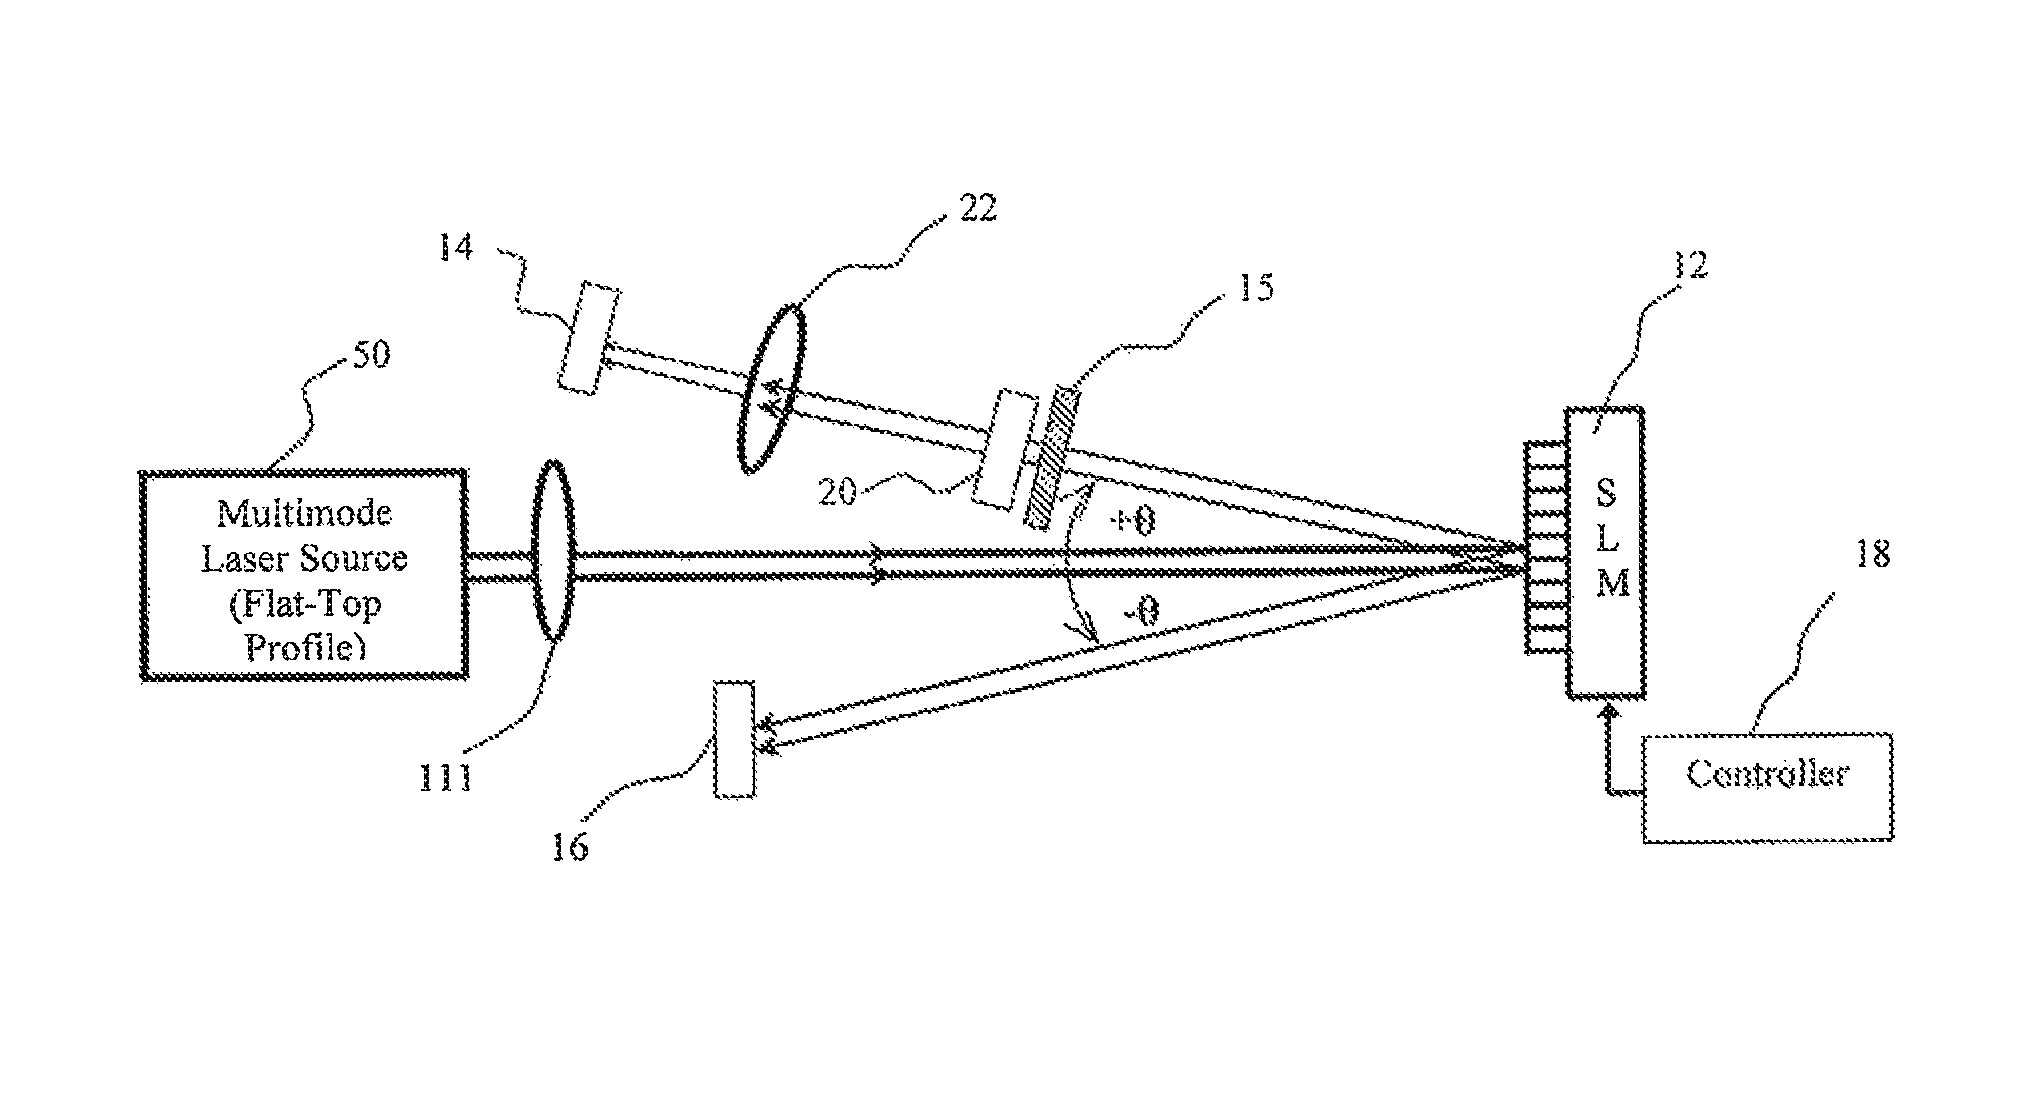 System for laser-based digital marking of objects with images or digital image projection with the laser beam shaped and amplified to have uniform irradiance distribution over the beam cross-section